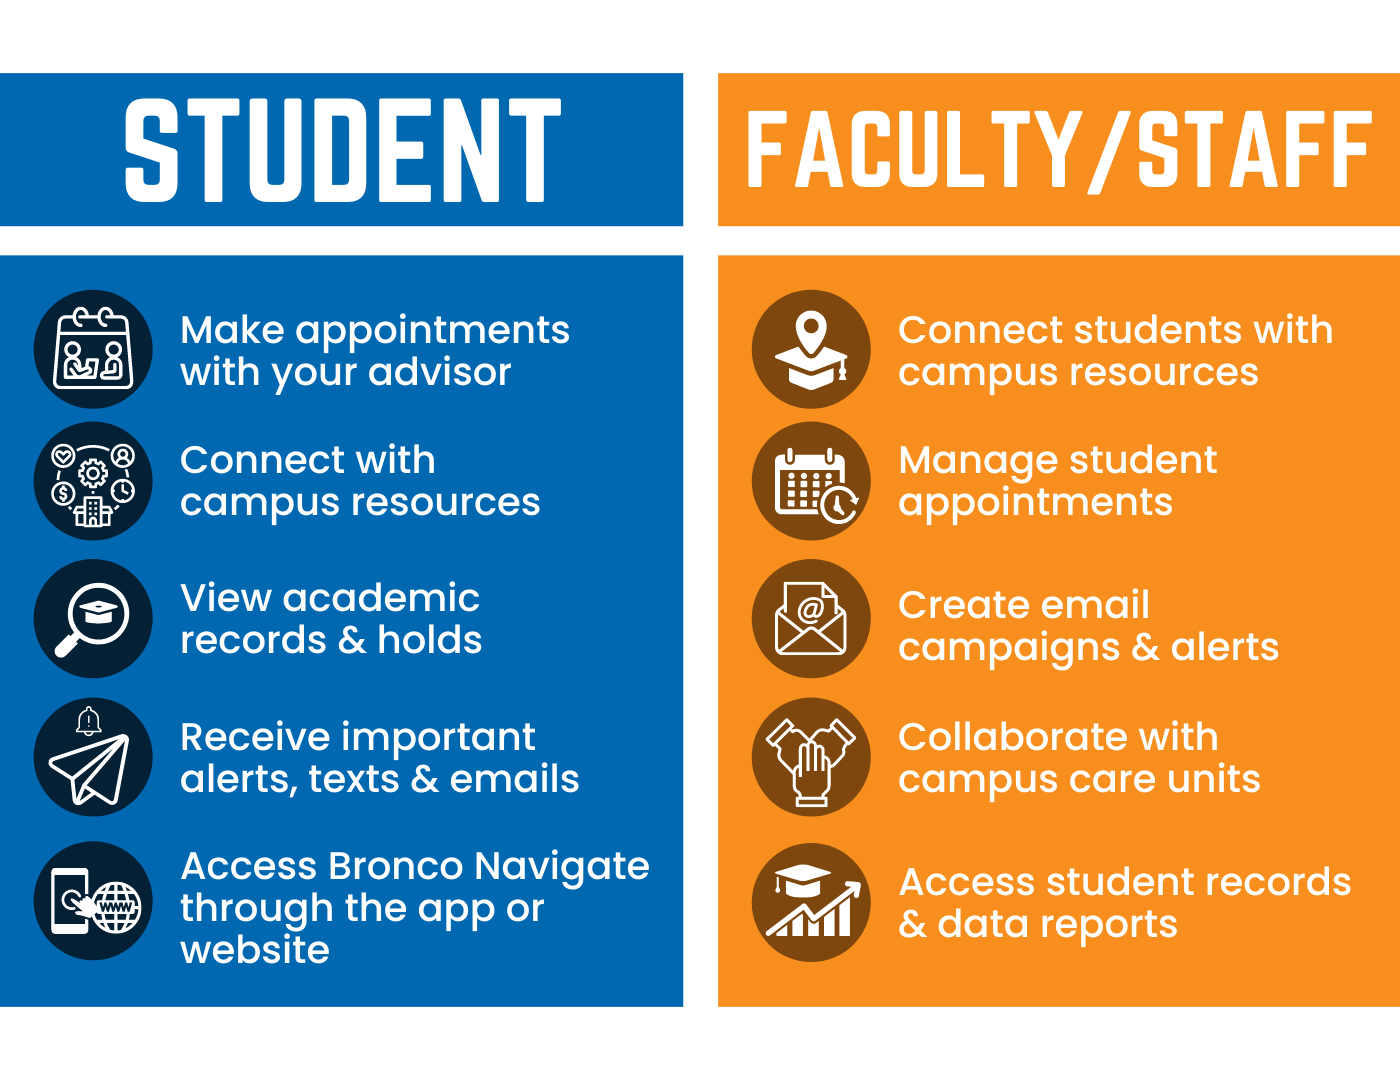 Image of student & faculty features of Bronco Navigate 